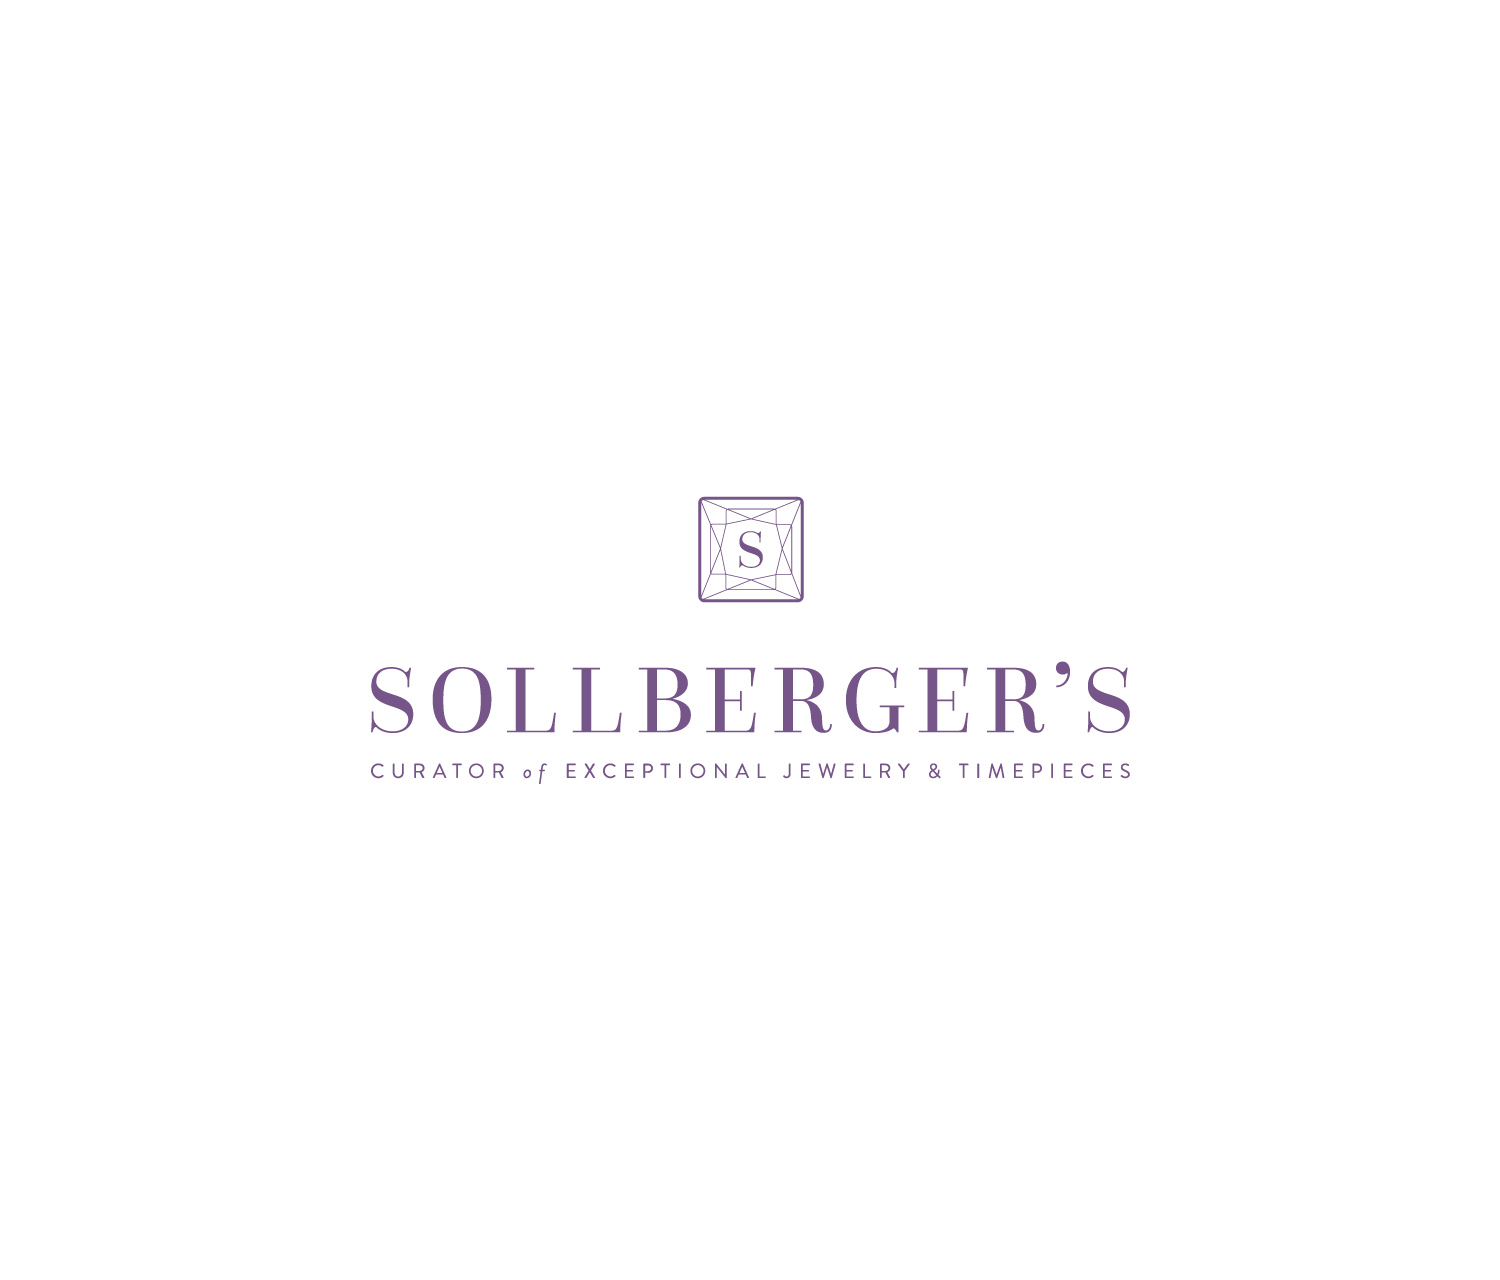 Sollberger's